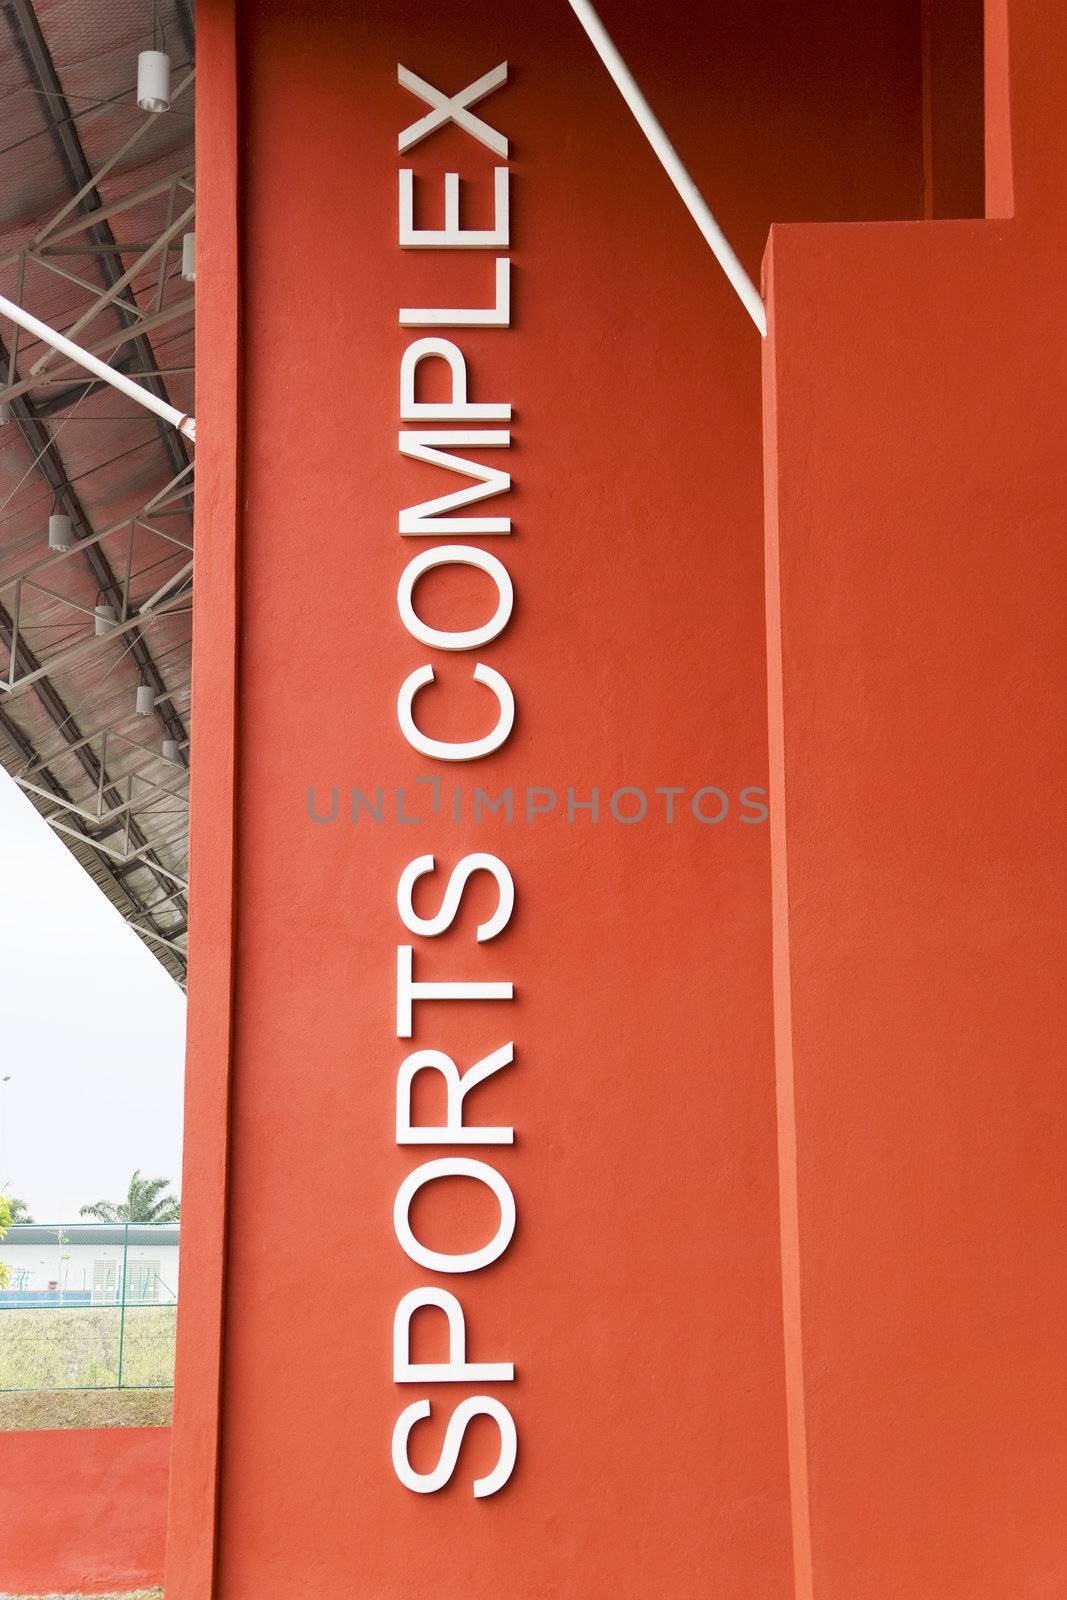 Image of the generic words "sports complex" on a building.